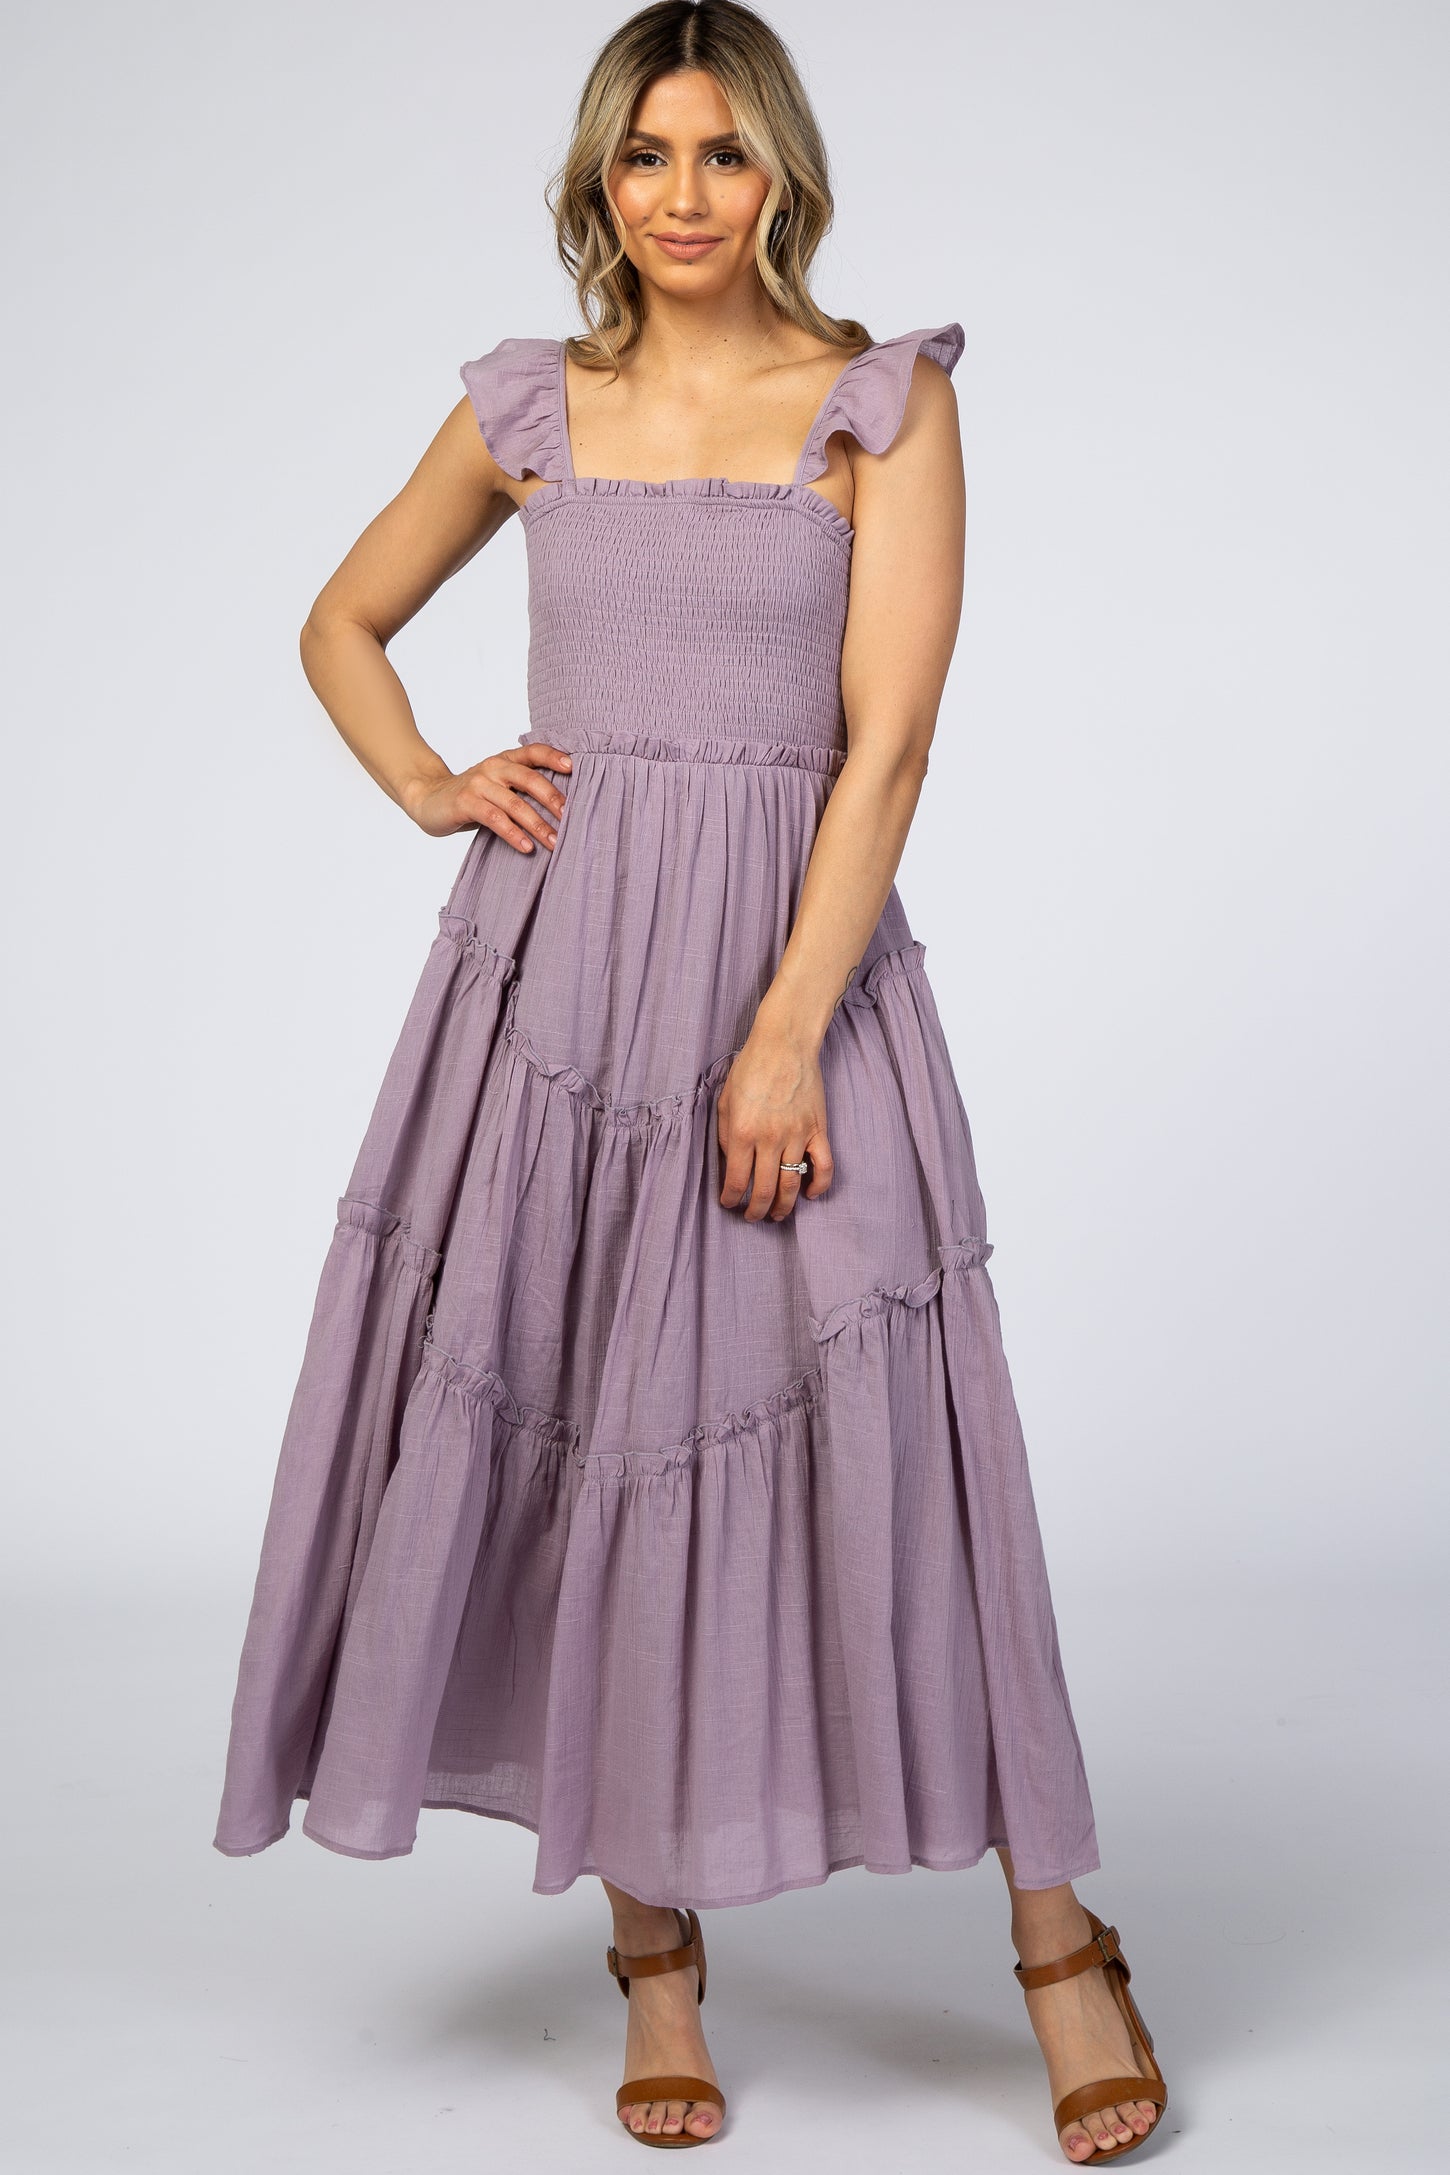 Lavender Smocked Ruffle Accent Dress